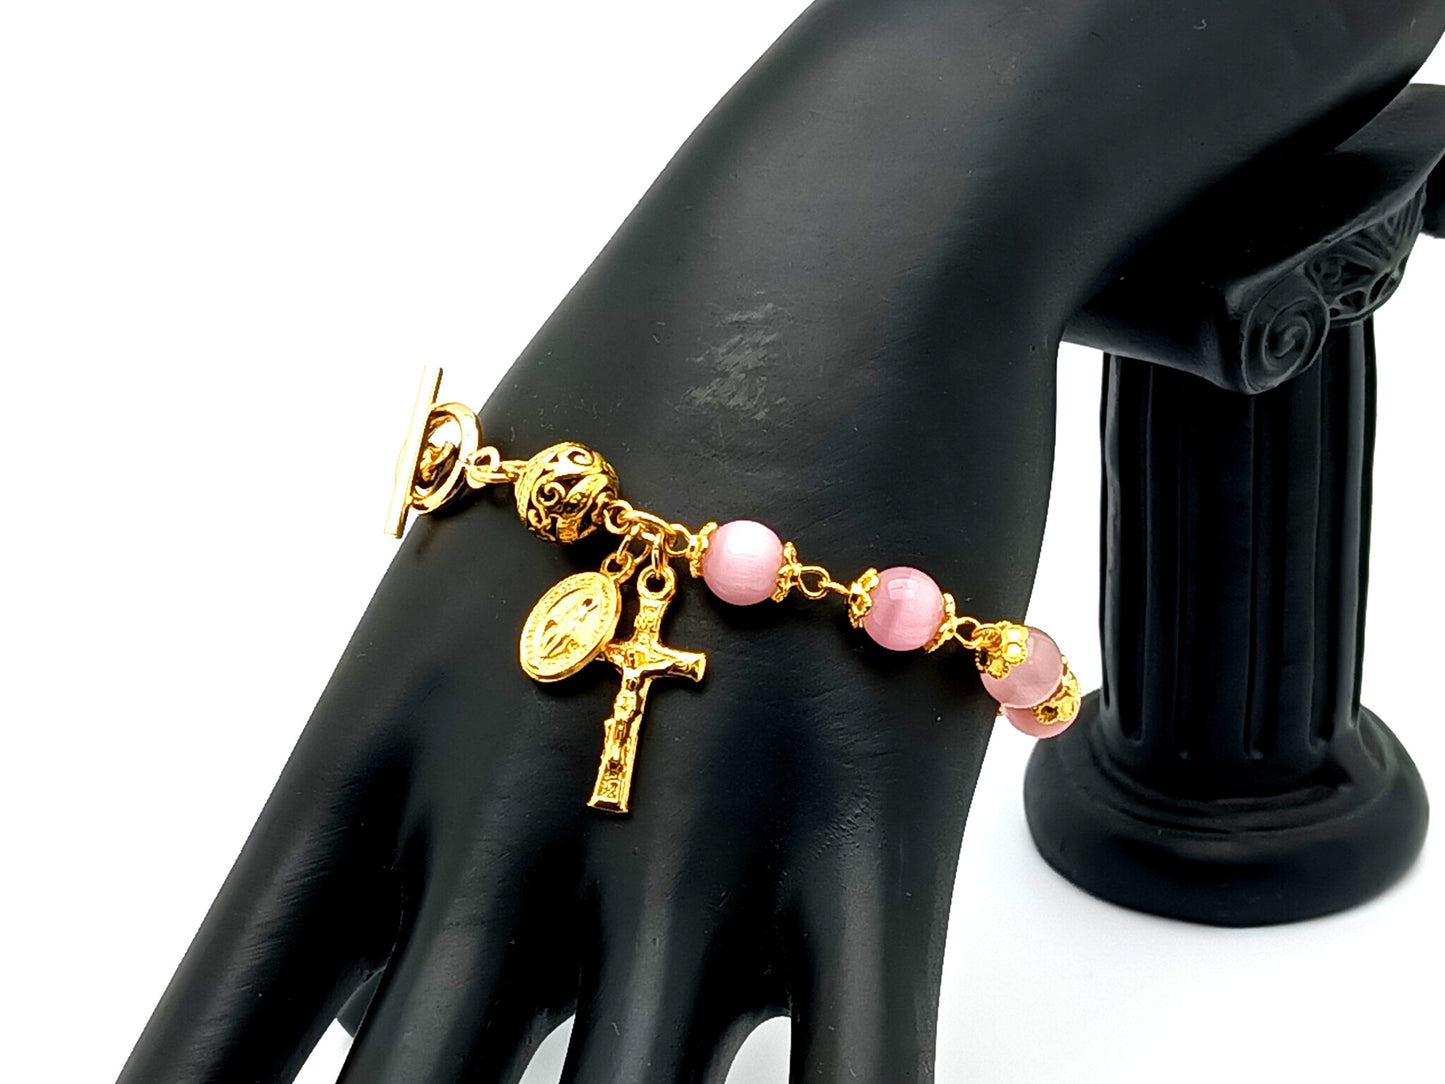 Miraculous medal unique rosary beads gold and pink cats eye single decade rosary bracelet with gold Our Father bead and crucifix.